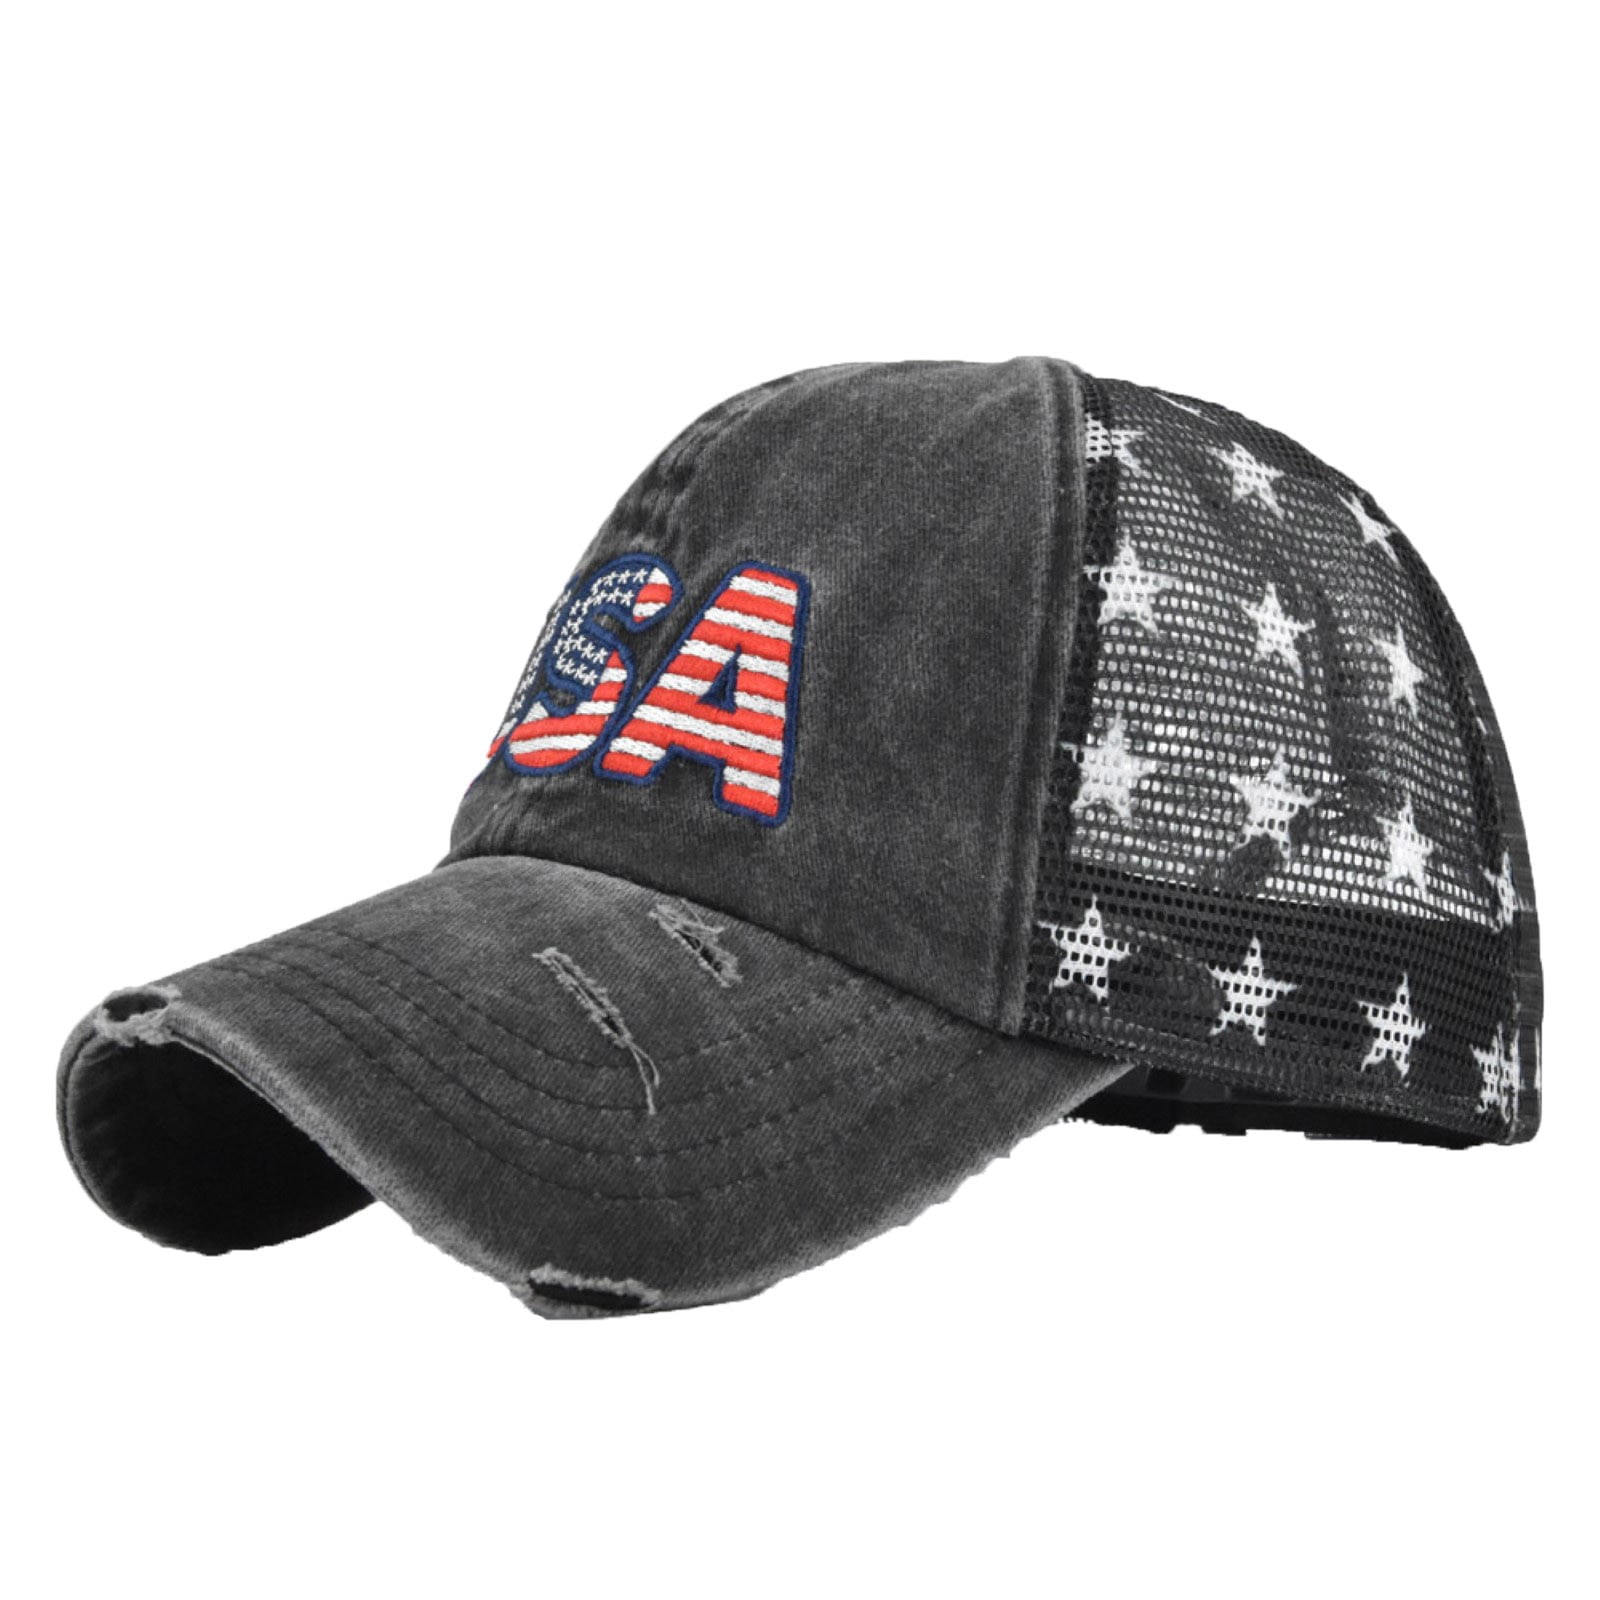 Stormdoing Vintage Baseball Hats for Men American Flag Patch Breathable Mesh Classic Baseball Caps Adjust Cotton Running Ball Hats, Adult Unisex, Size